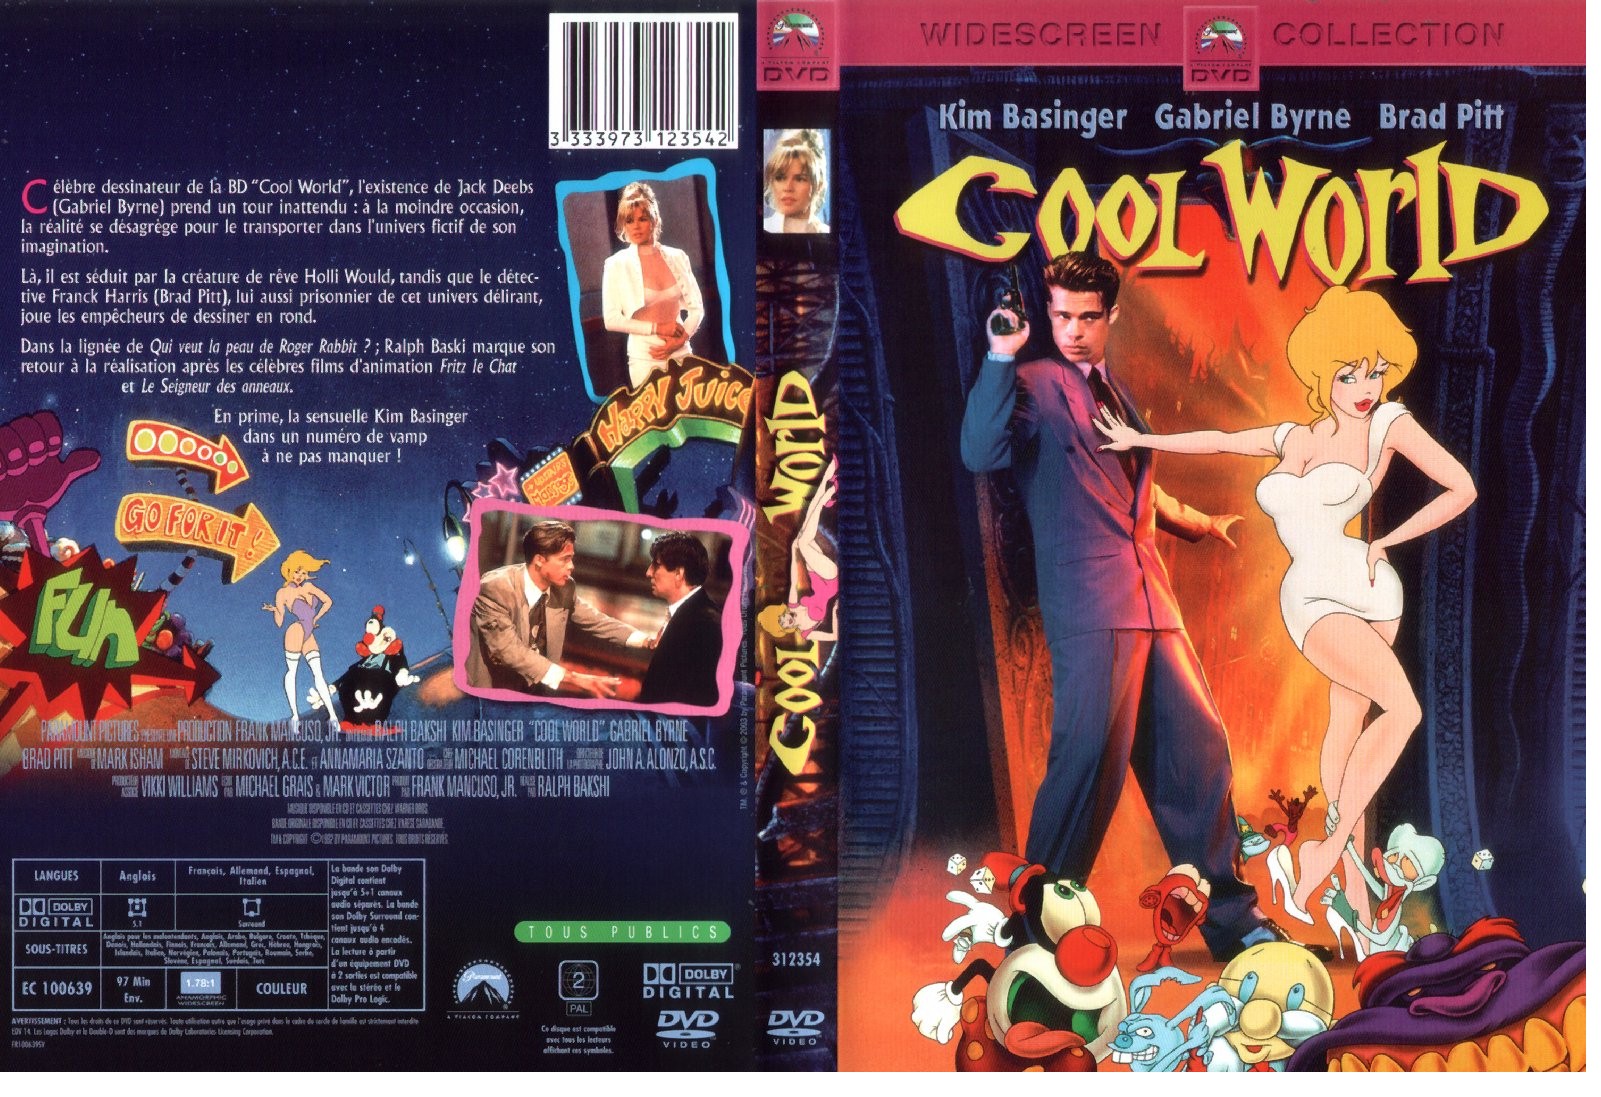 Jaquette DVD Cool World.